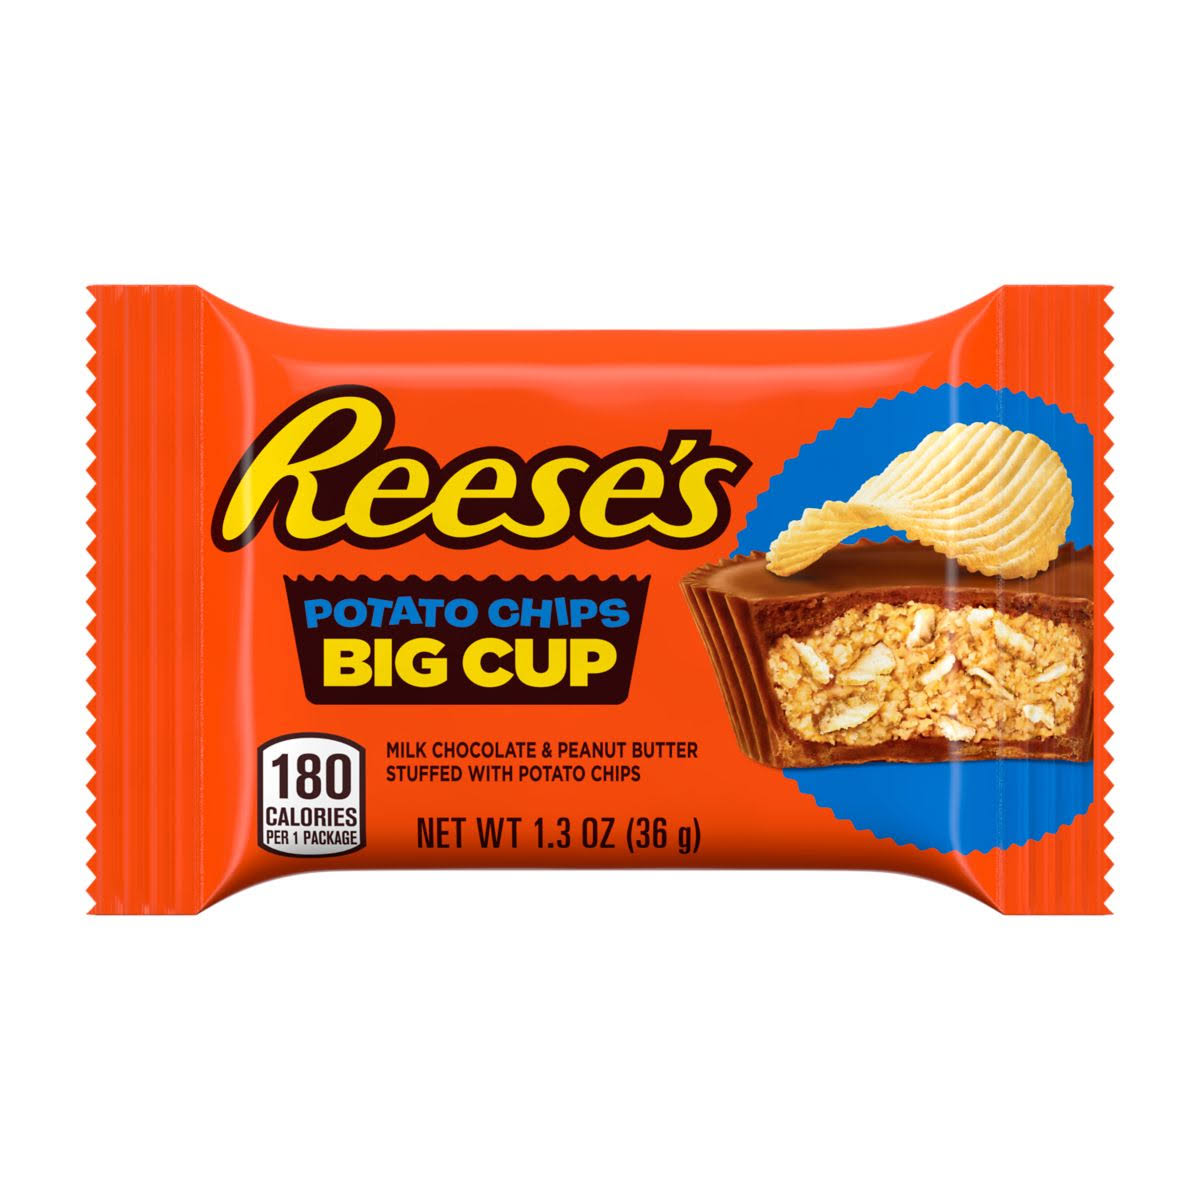 Reese's Big Cup with Potato Chips Peanut Butter Cup